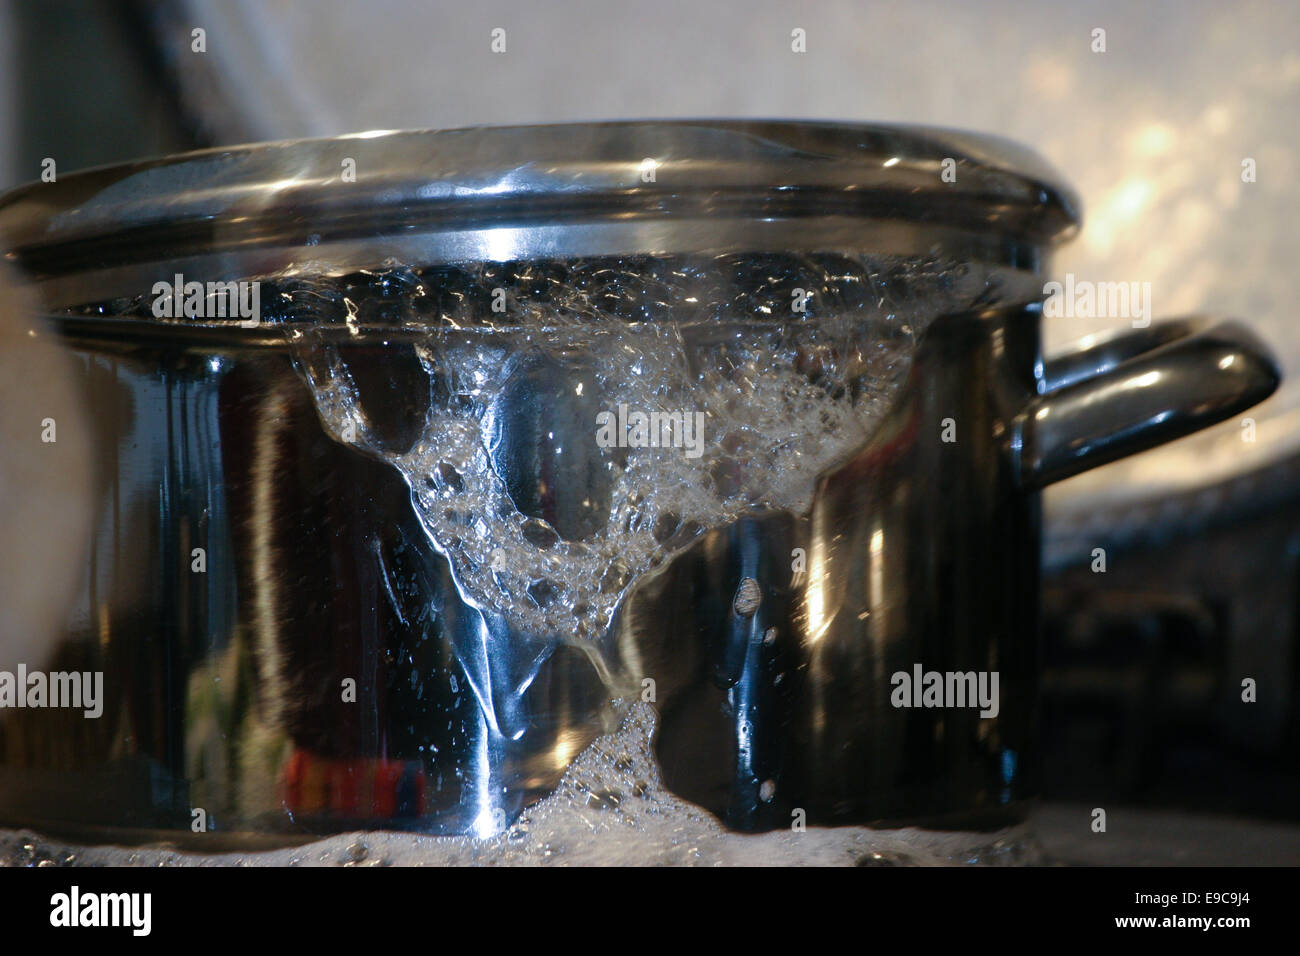 Water boiling over from a saucepan with lid.  Froth on the side of the pan. Stock Photo